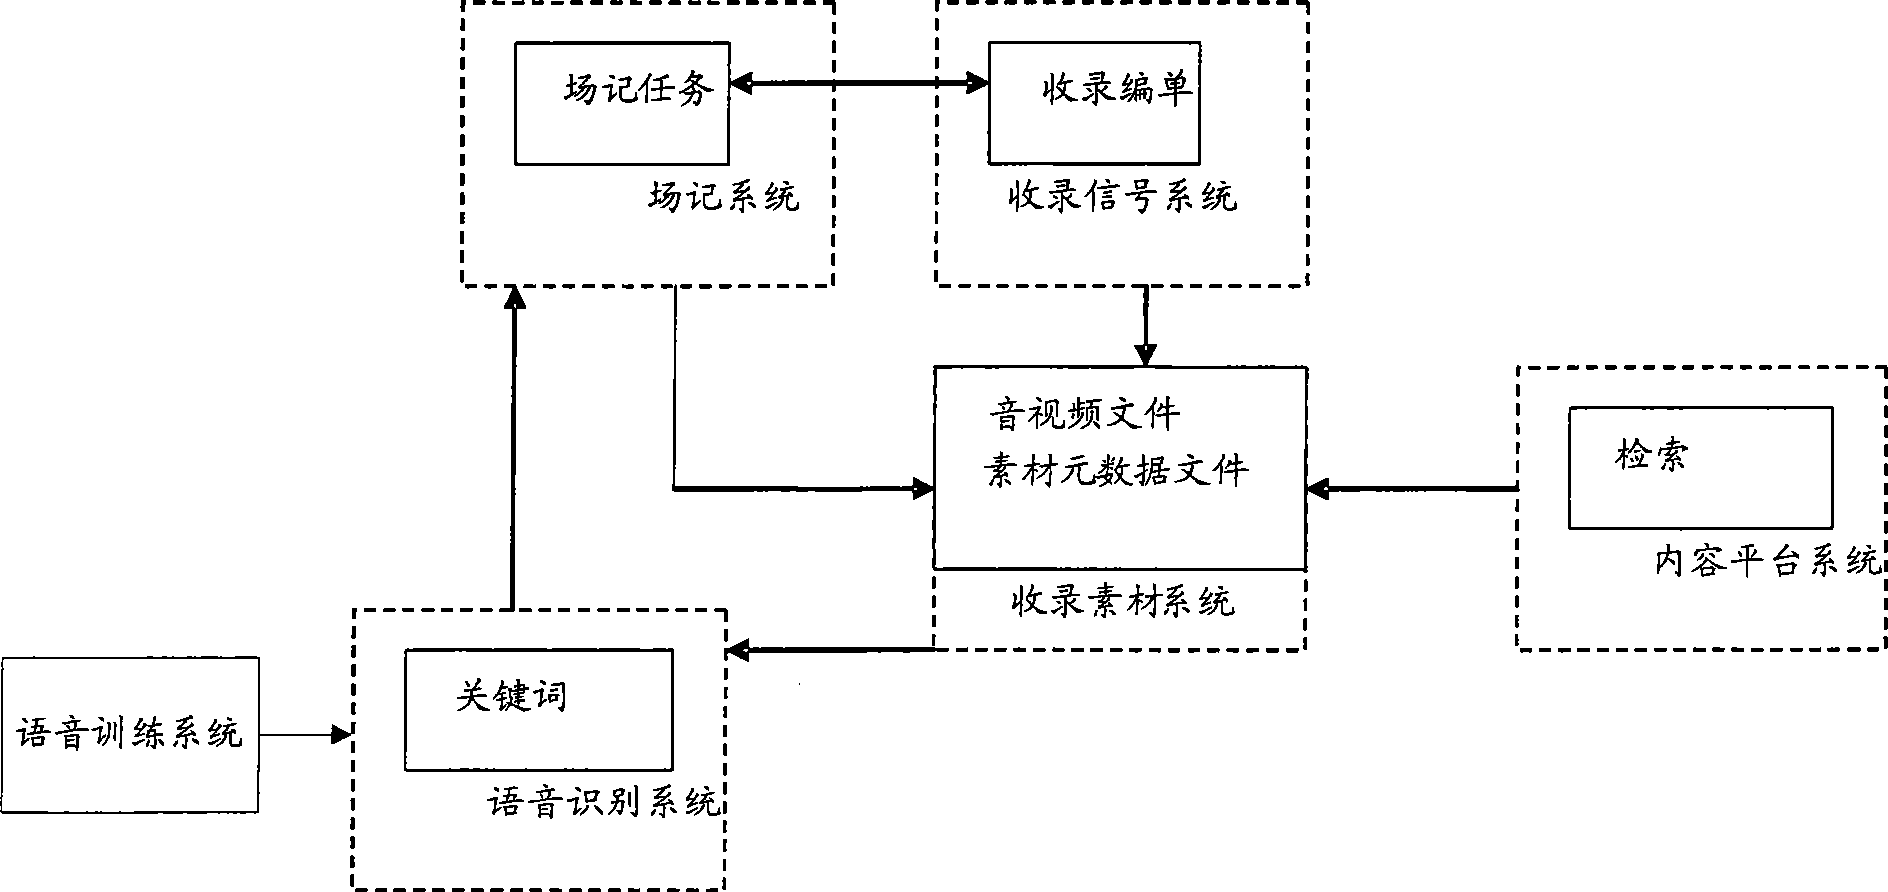 Log keeping system and method